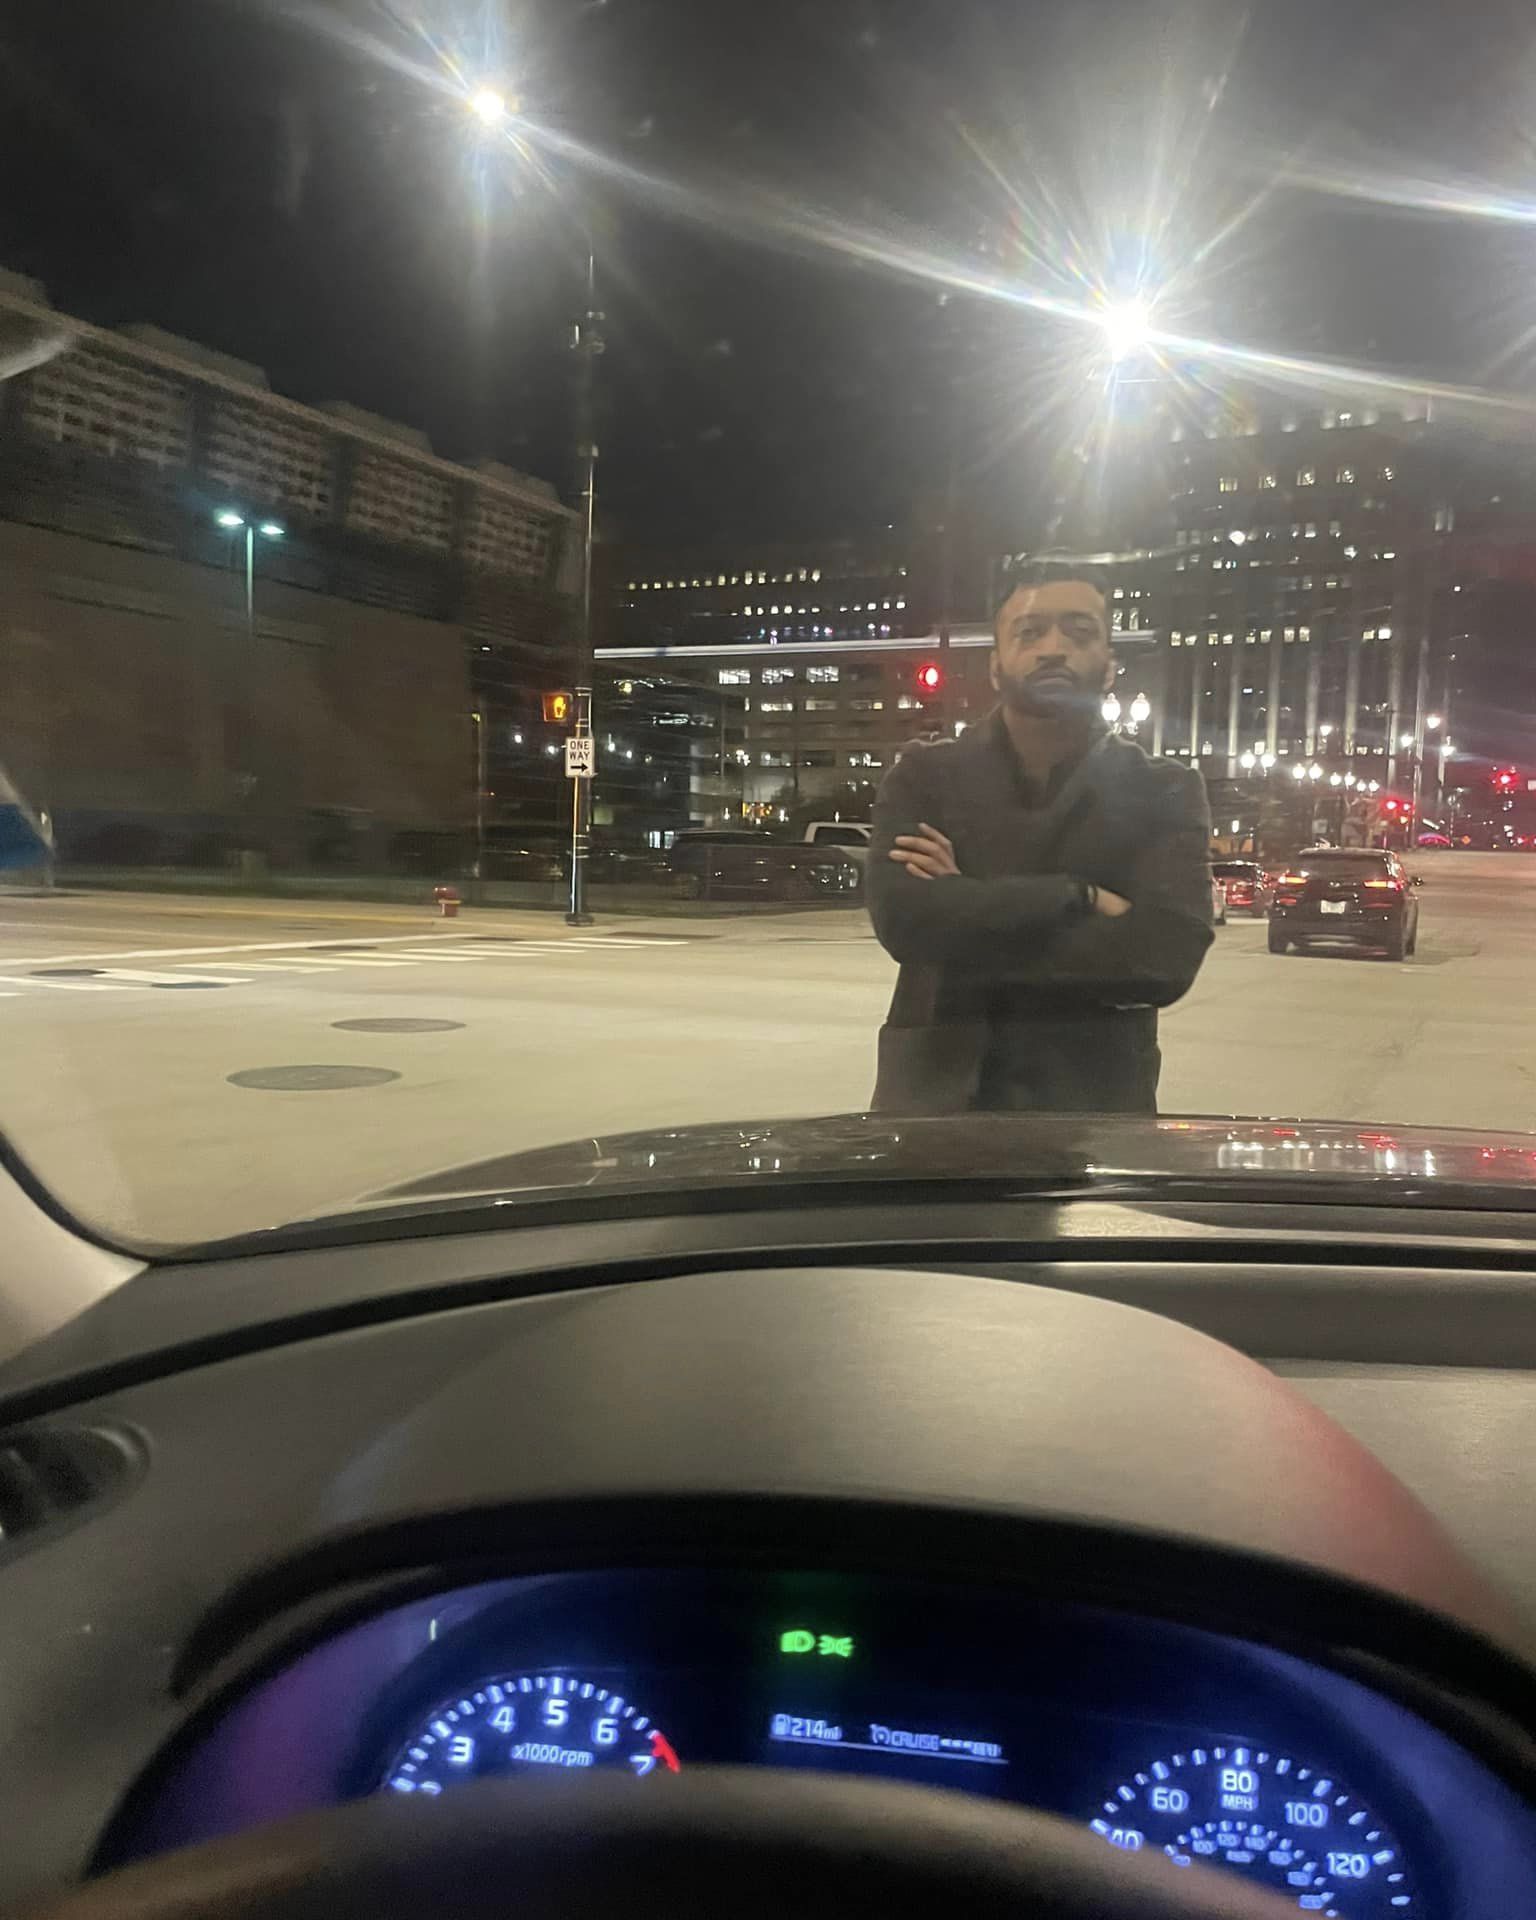 Anyone know this motherfucker that lives at 235 w van buren? He just kicked my car and threatened me and I’m pressing charges